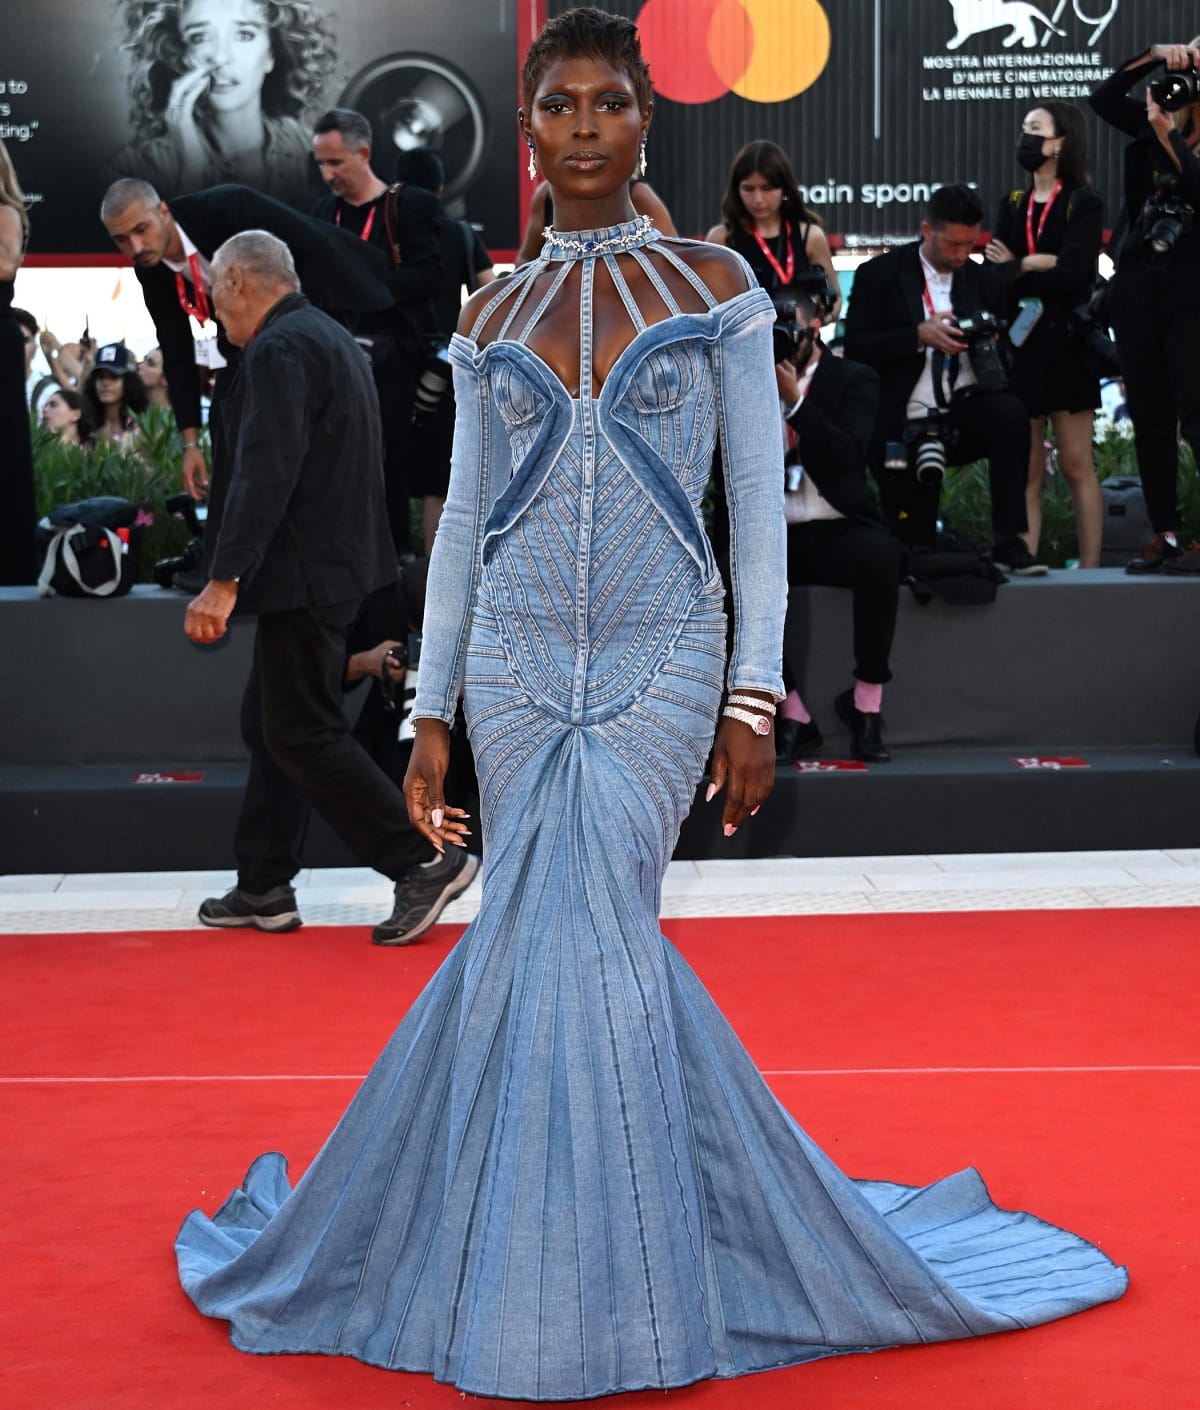 Jodie Turner-Smith wearing a custom Balmain denim fishtail gown on the red carpet